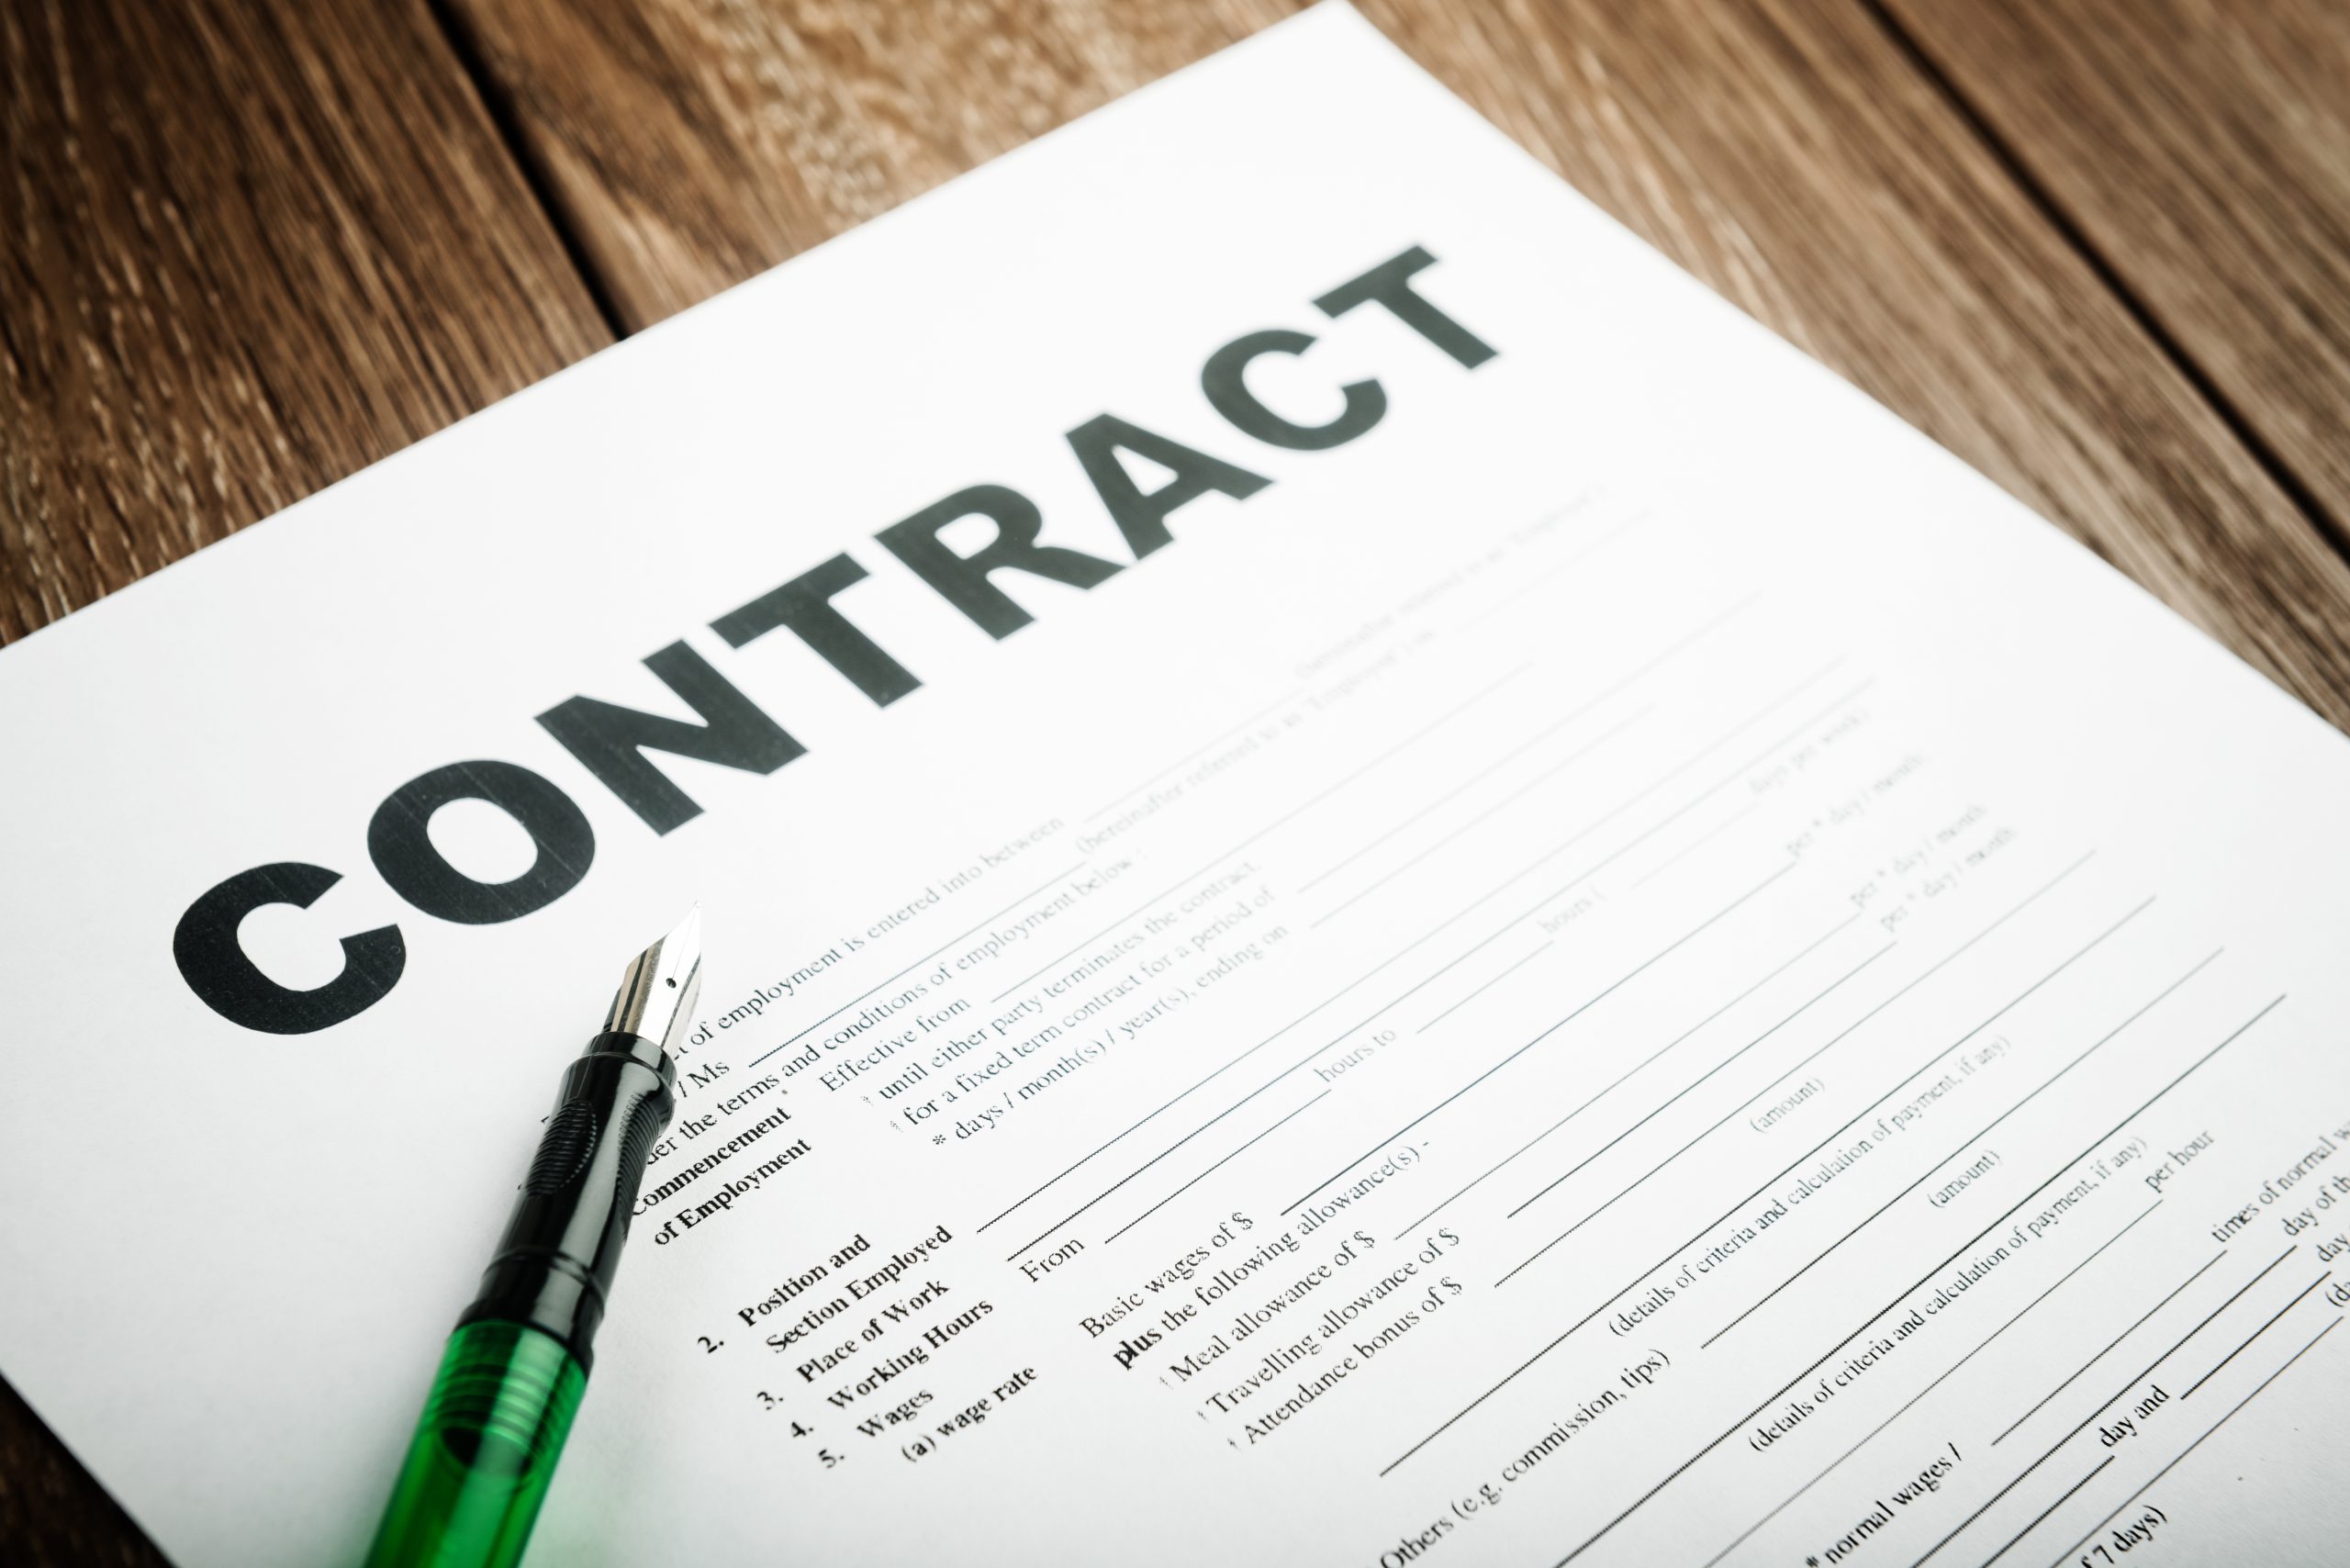 Paper contract on table